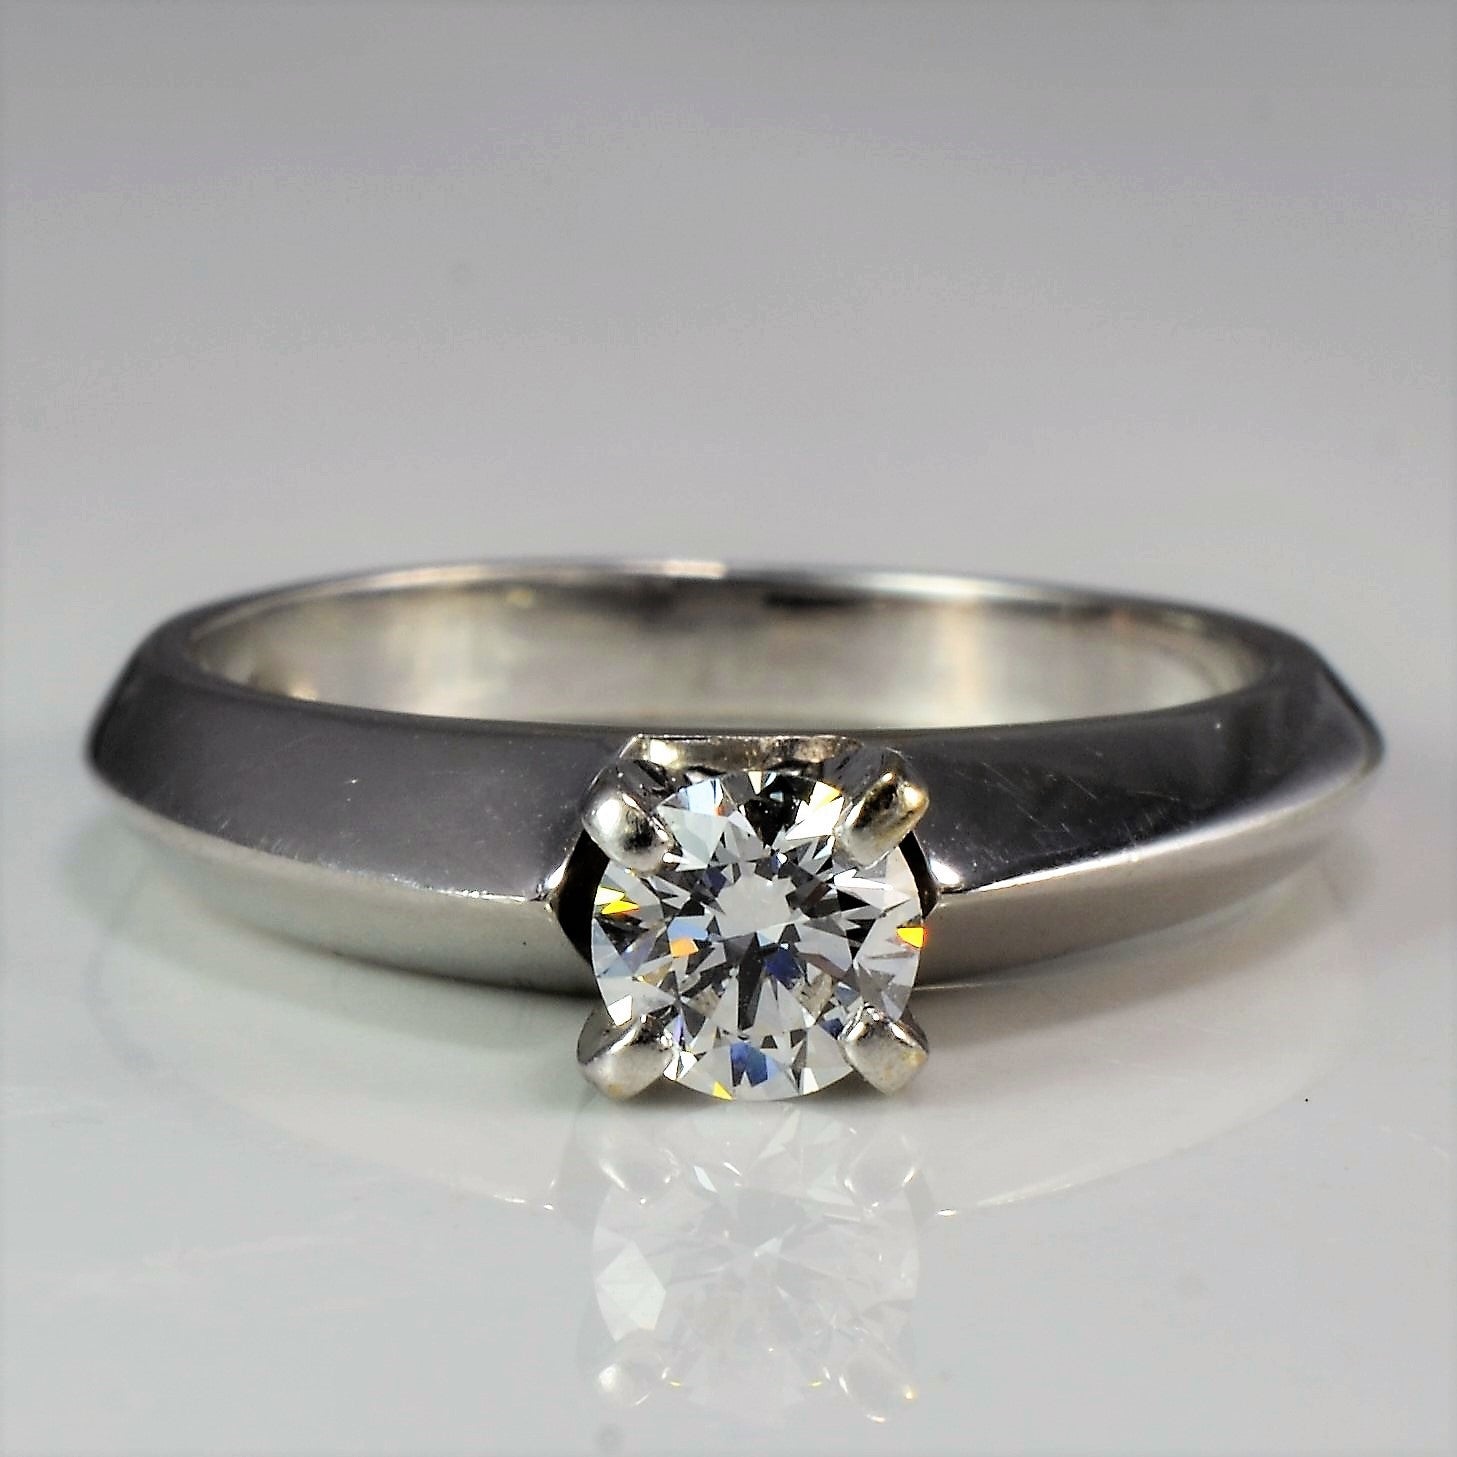 Bevelled White Gold Solitaire Engagement Ring | 0.35 ct, SZ 6 |